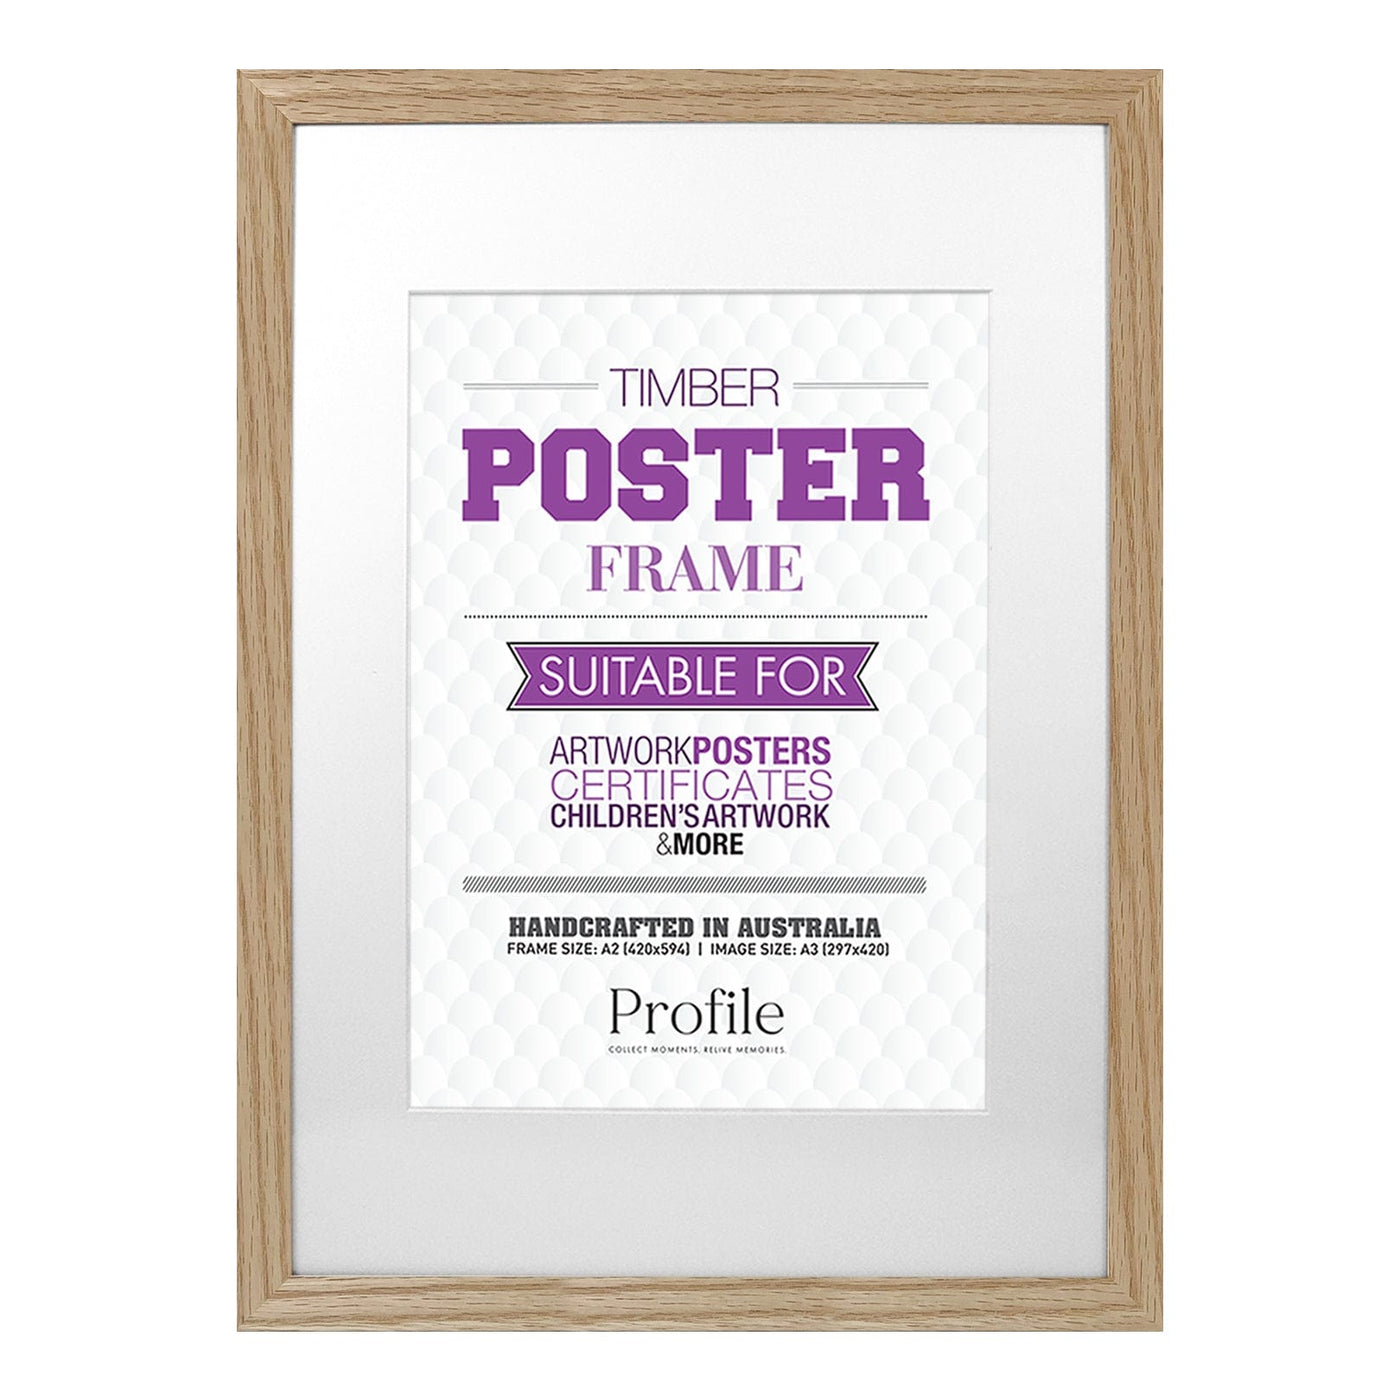 Classic Natural Oak Poster Frame A2 (42x59cm) to suit A3 (30x42cm) image from our Australian Made Picture Frames collection by Profile Products Australia